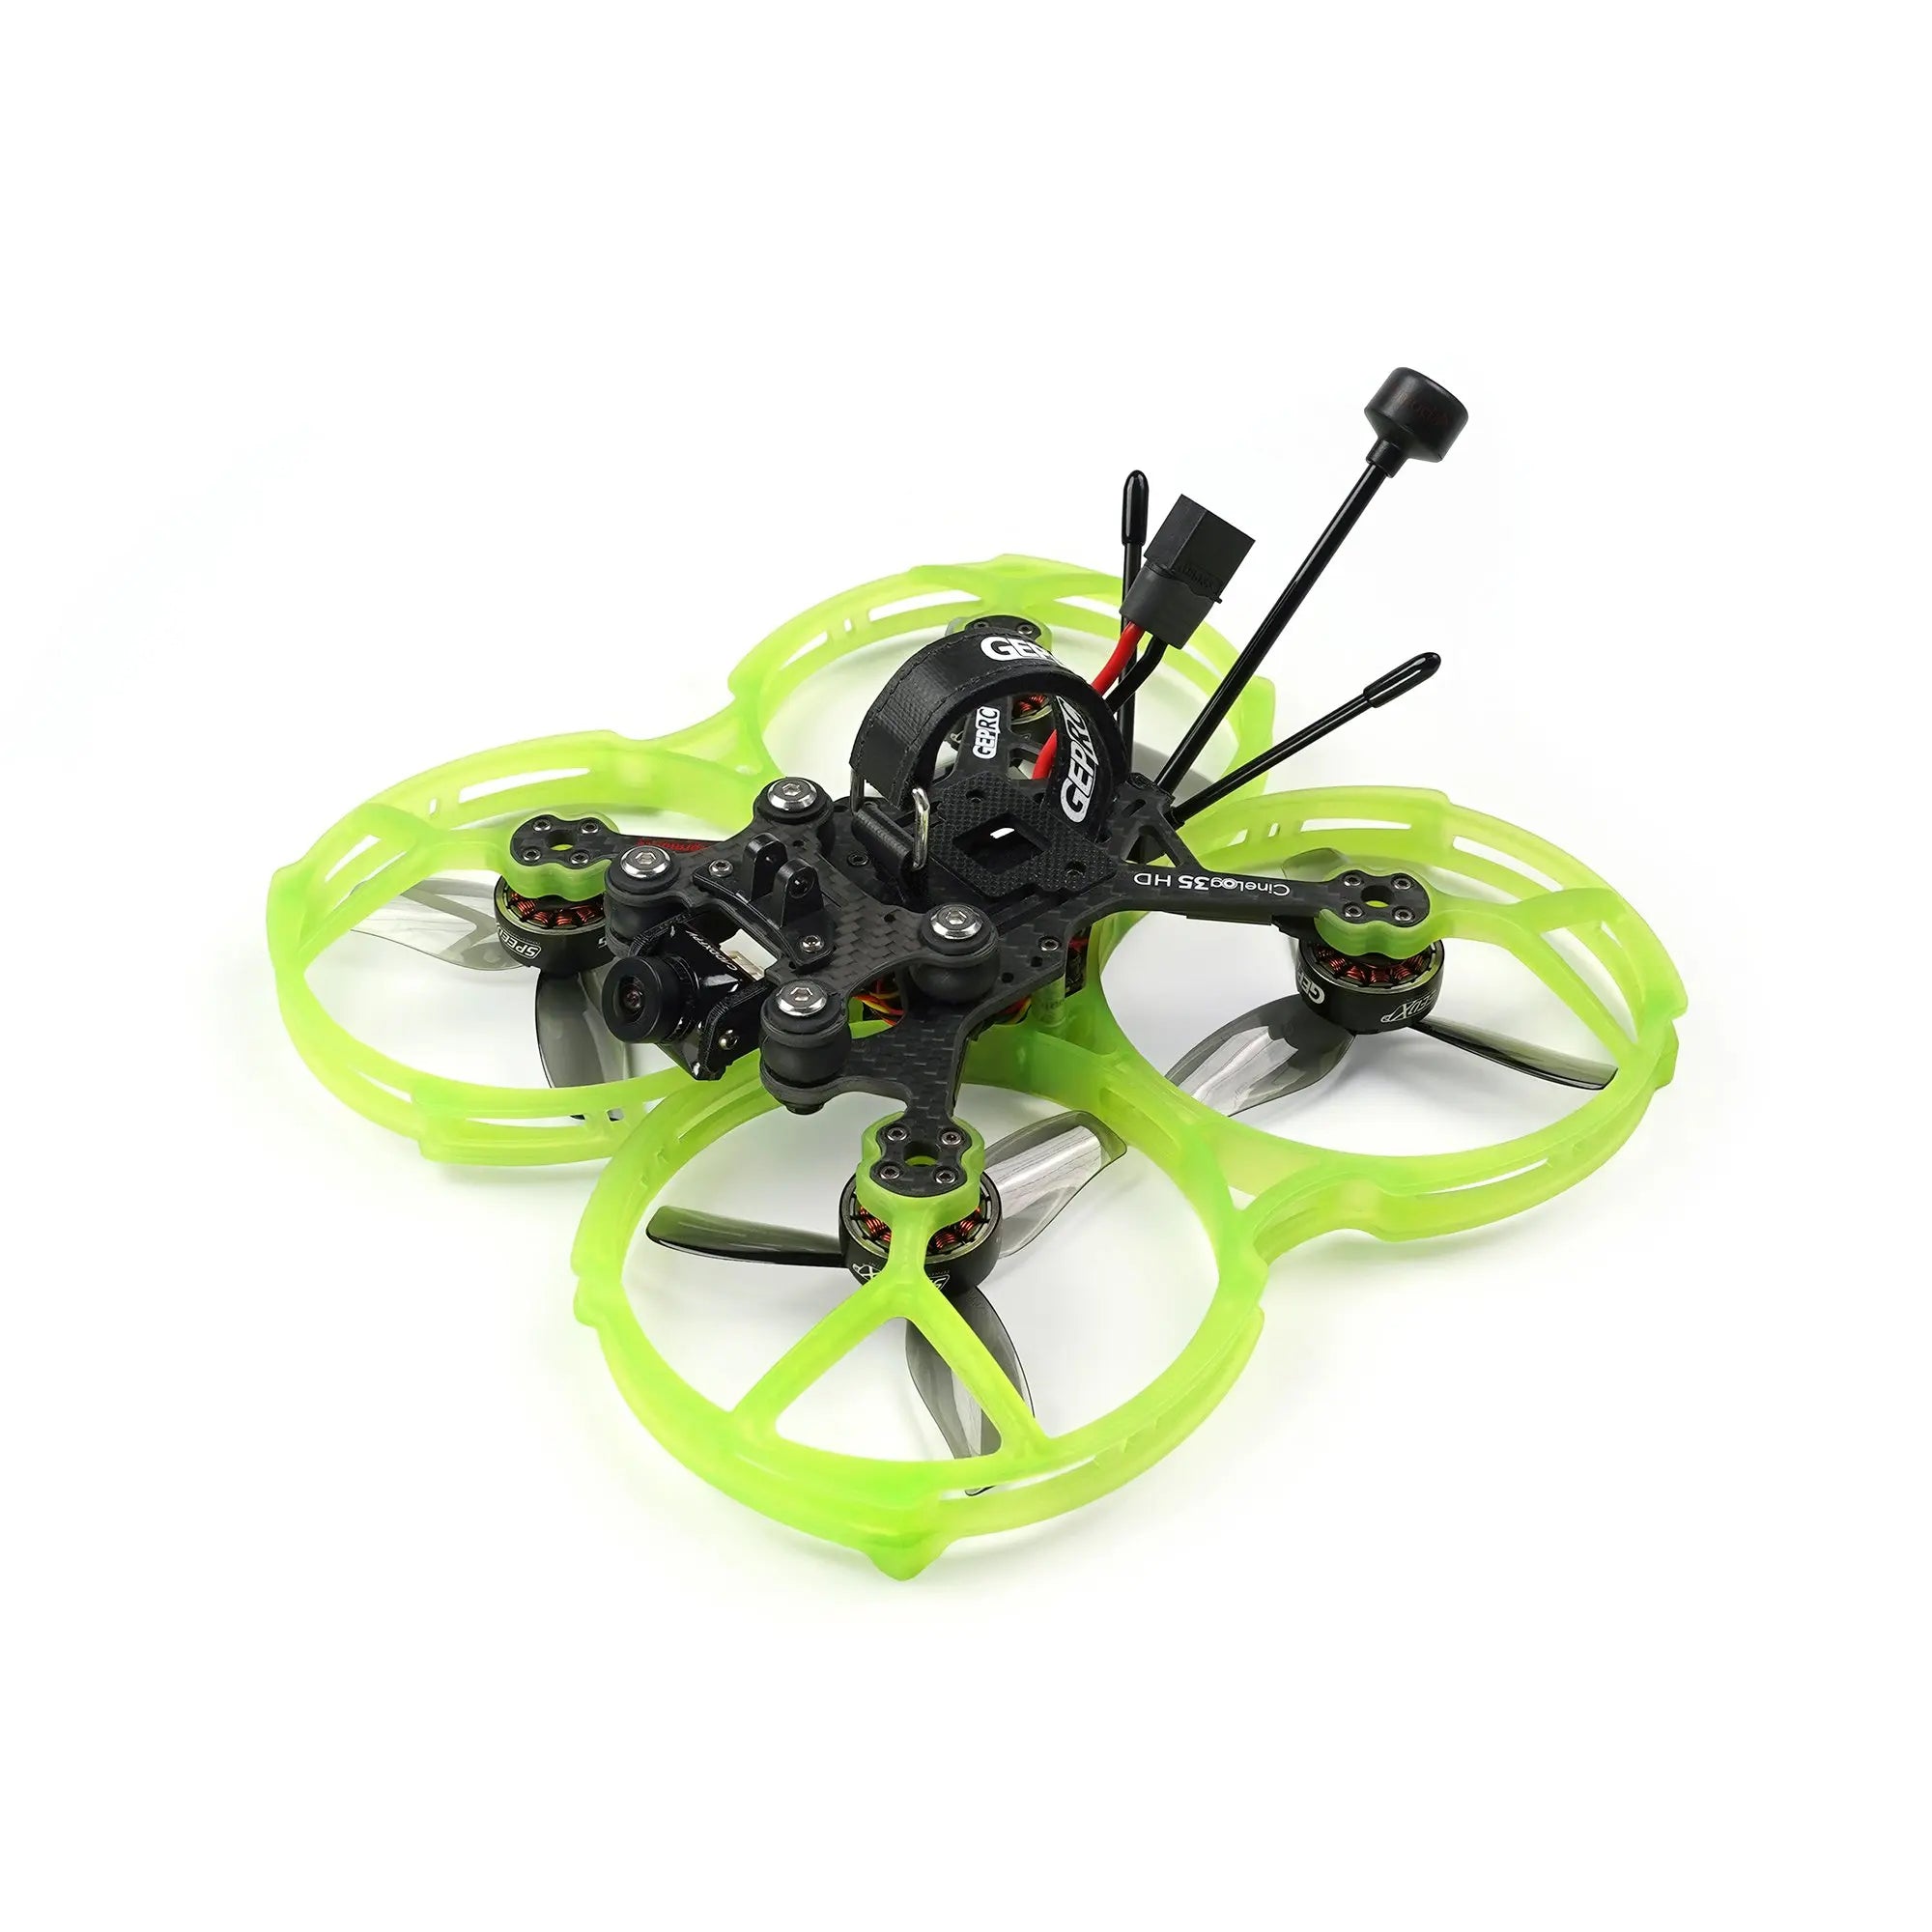 GEPRC CineLog35 Cinewhoop FPV Drone, the new SPEEDX2 2105.5 motor has stronger power and faster response speed 